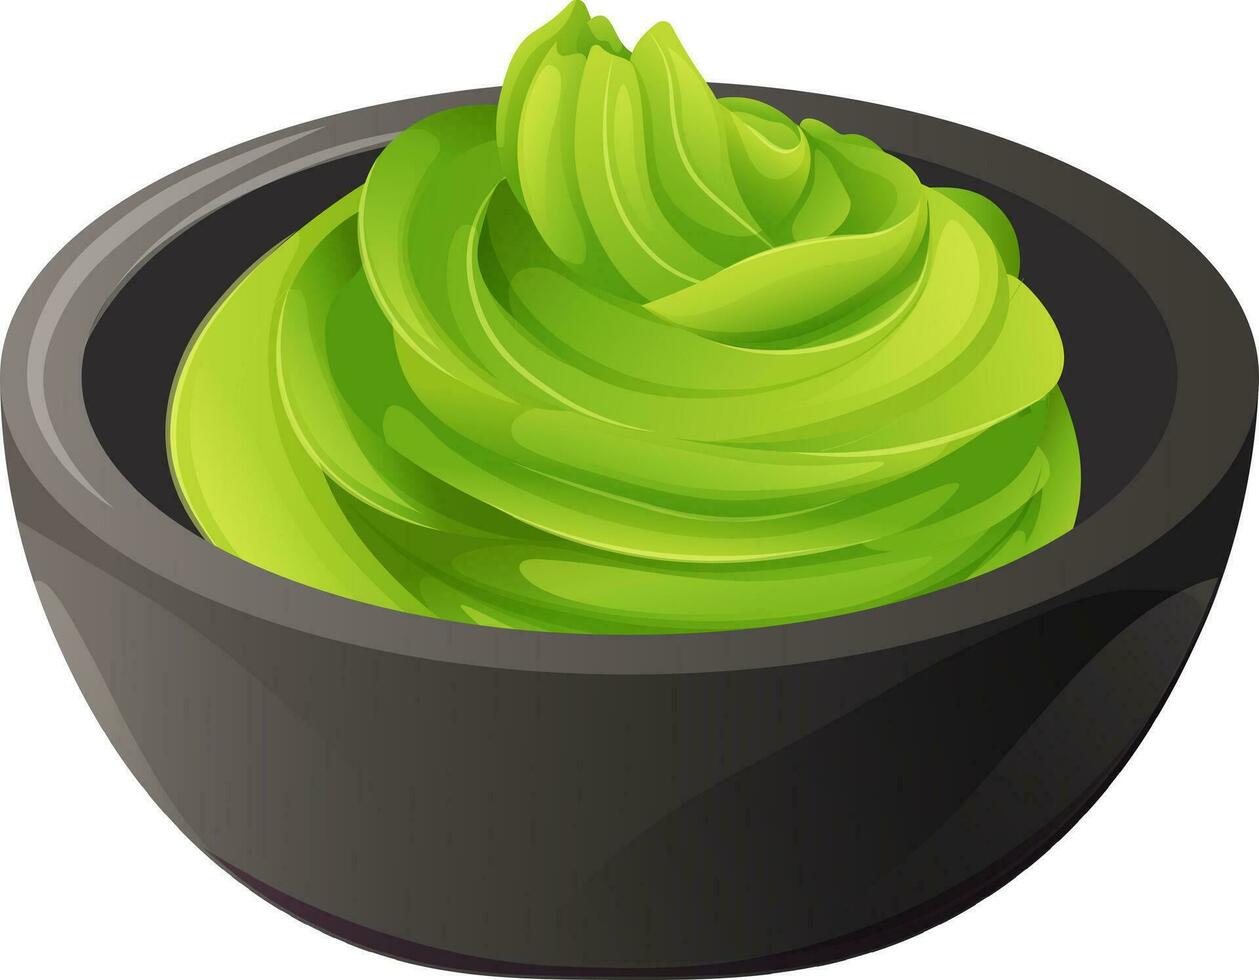 Bright green wasabi in black dishes. Vector illustration of spicy Asian dish on transparent background